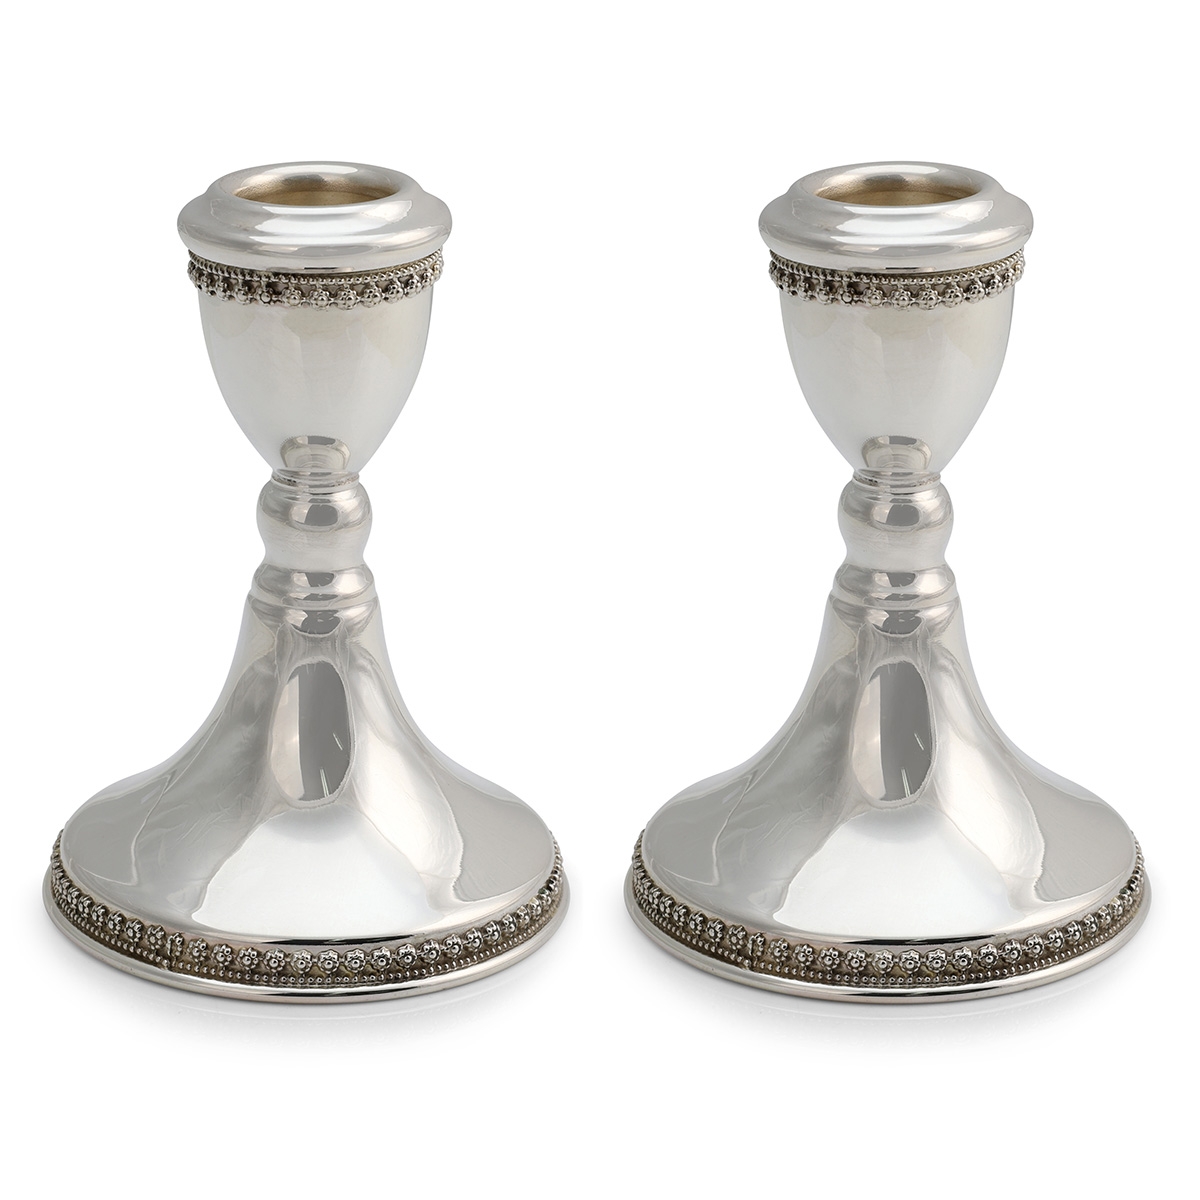 Chic Handcrafted Sterling Silver Shabbat Candlesticks With Floral Filigree Design By Traditional Yemenite Art - 1